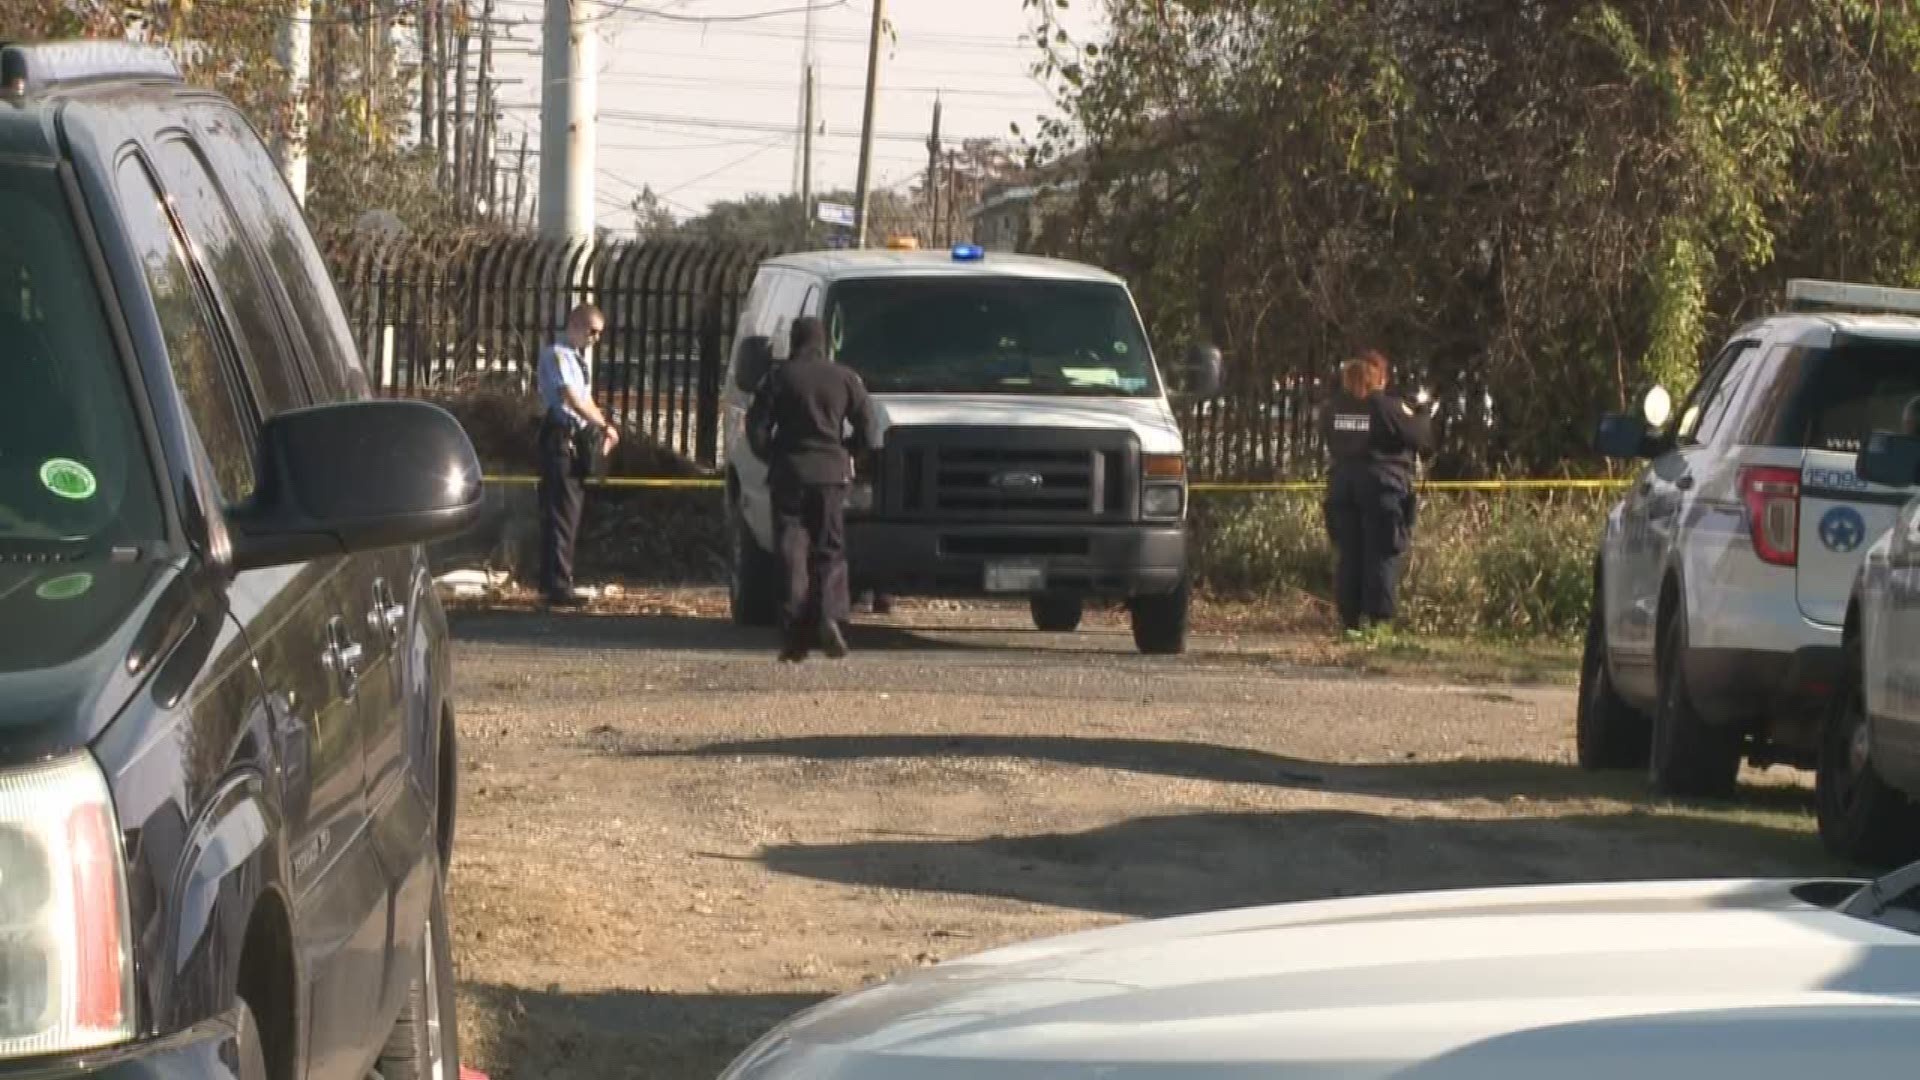 Police say the remains were found in an abandoned home in the 3300 block of Live Oak Street.